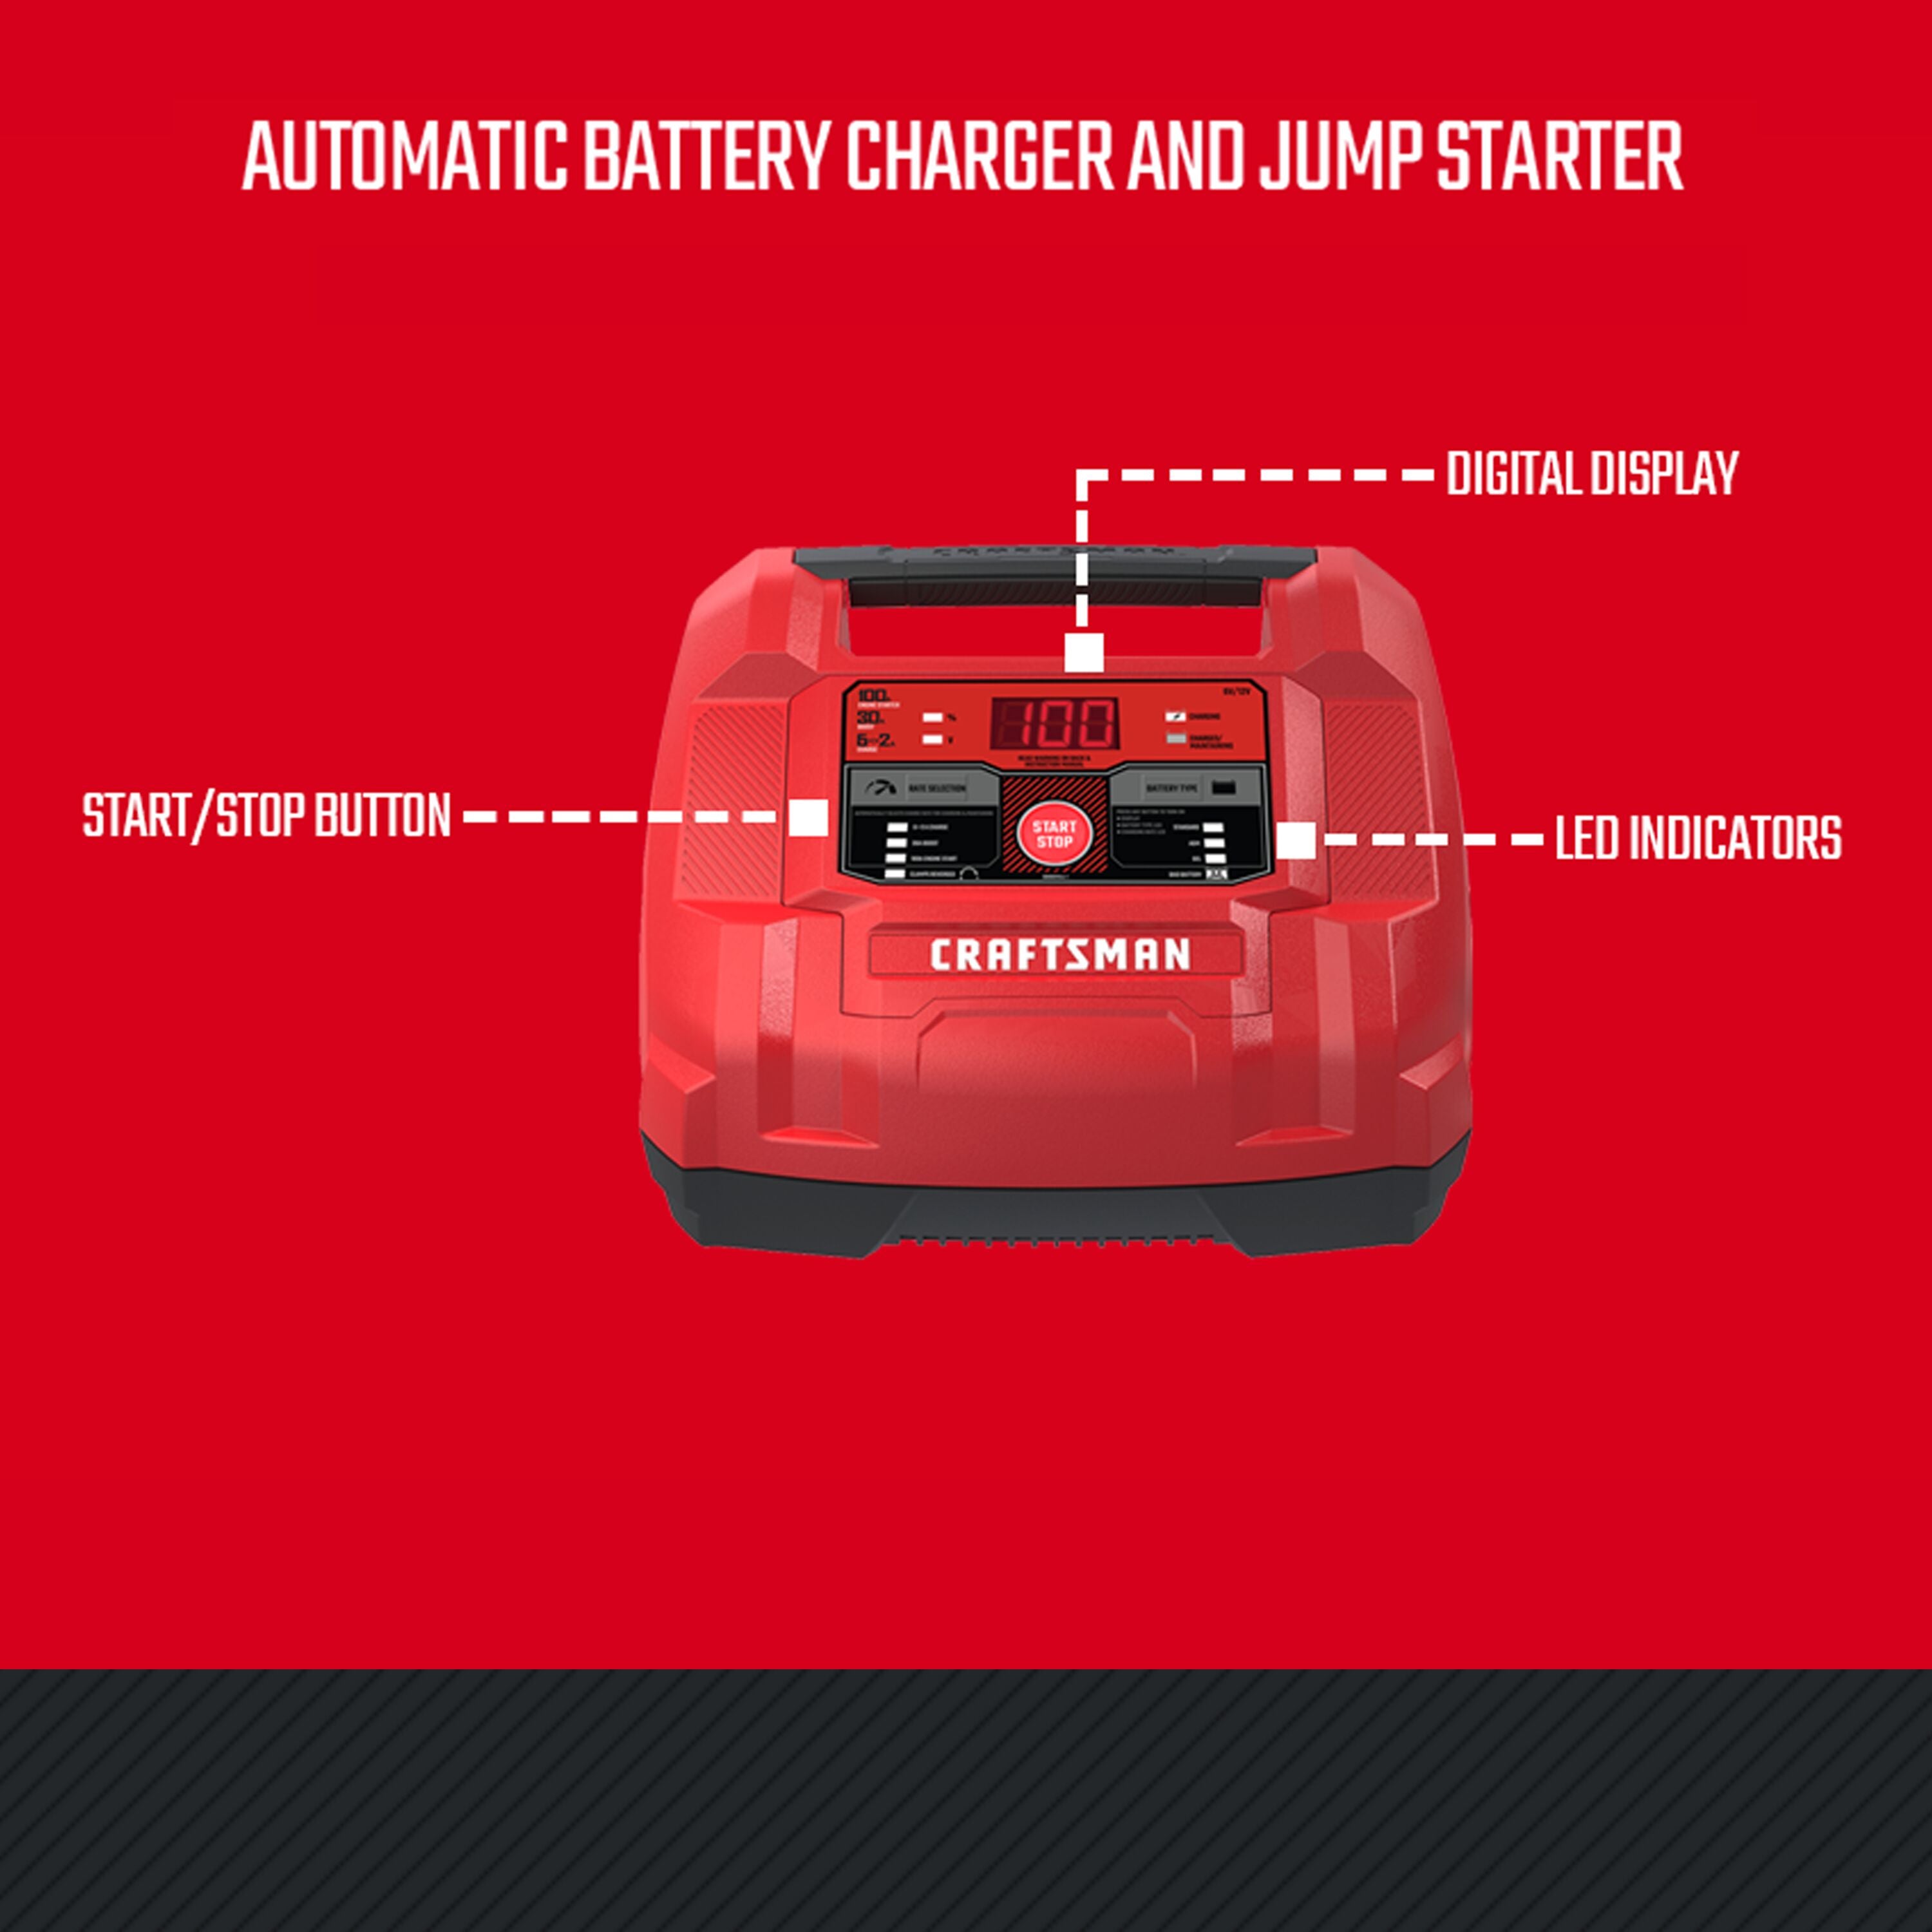 100A 6V/12V Fully Automatic Battery Charger and Jump Starter features graphic